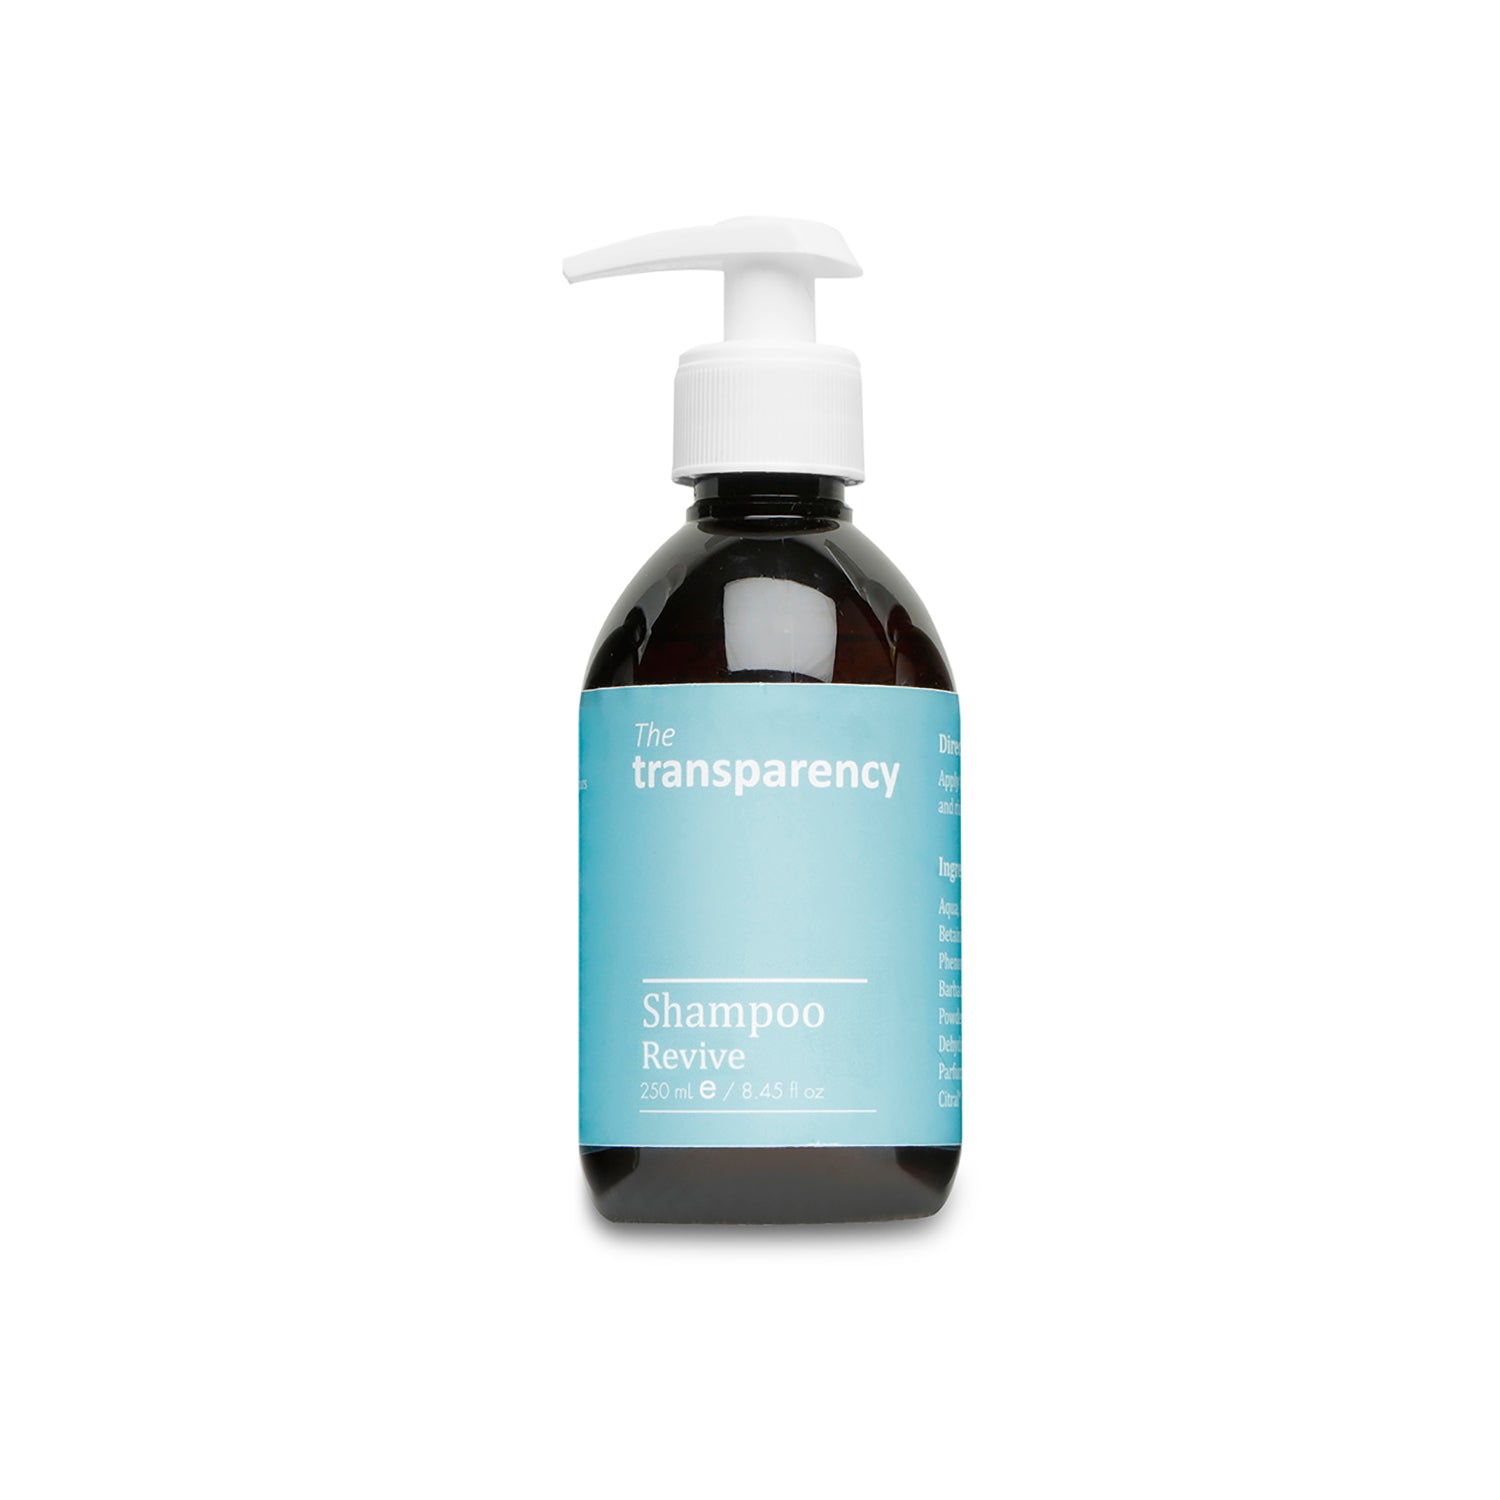 Revive Hair Shampoo - The transparency